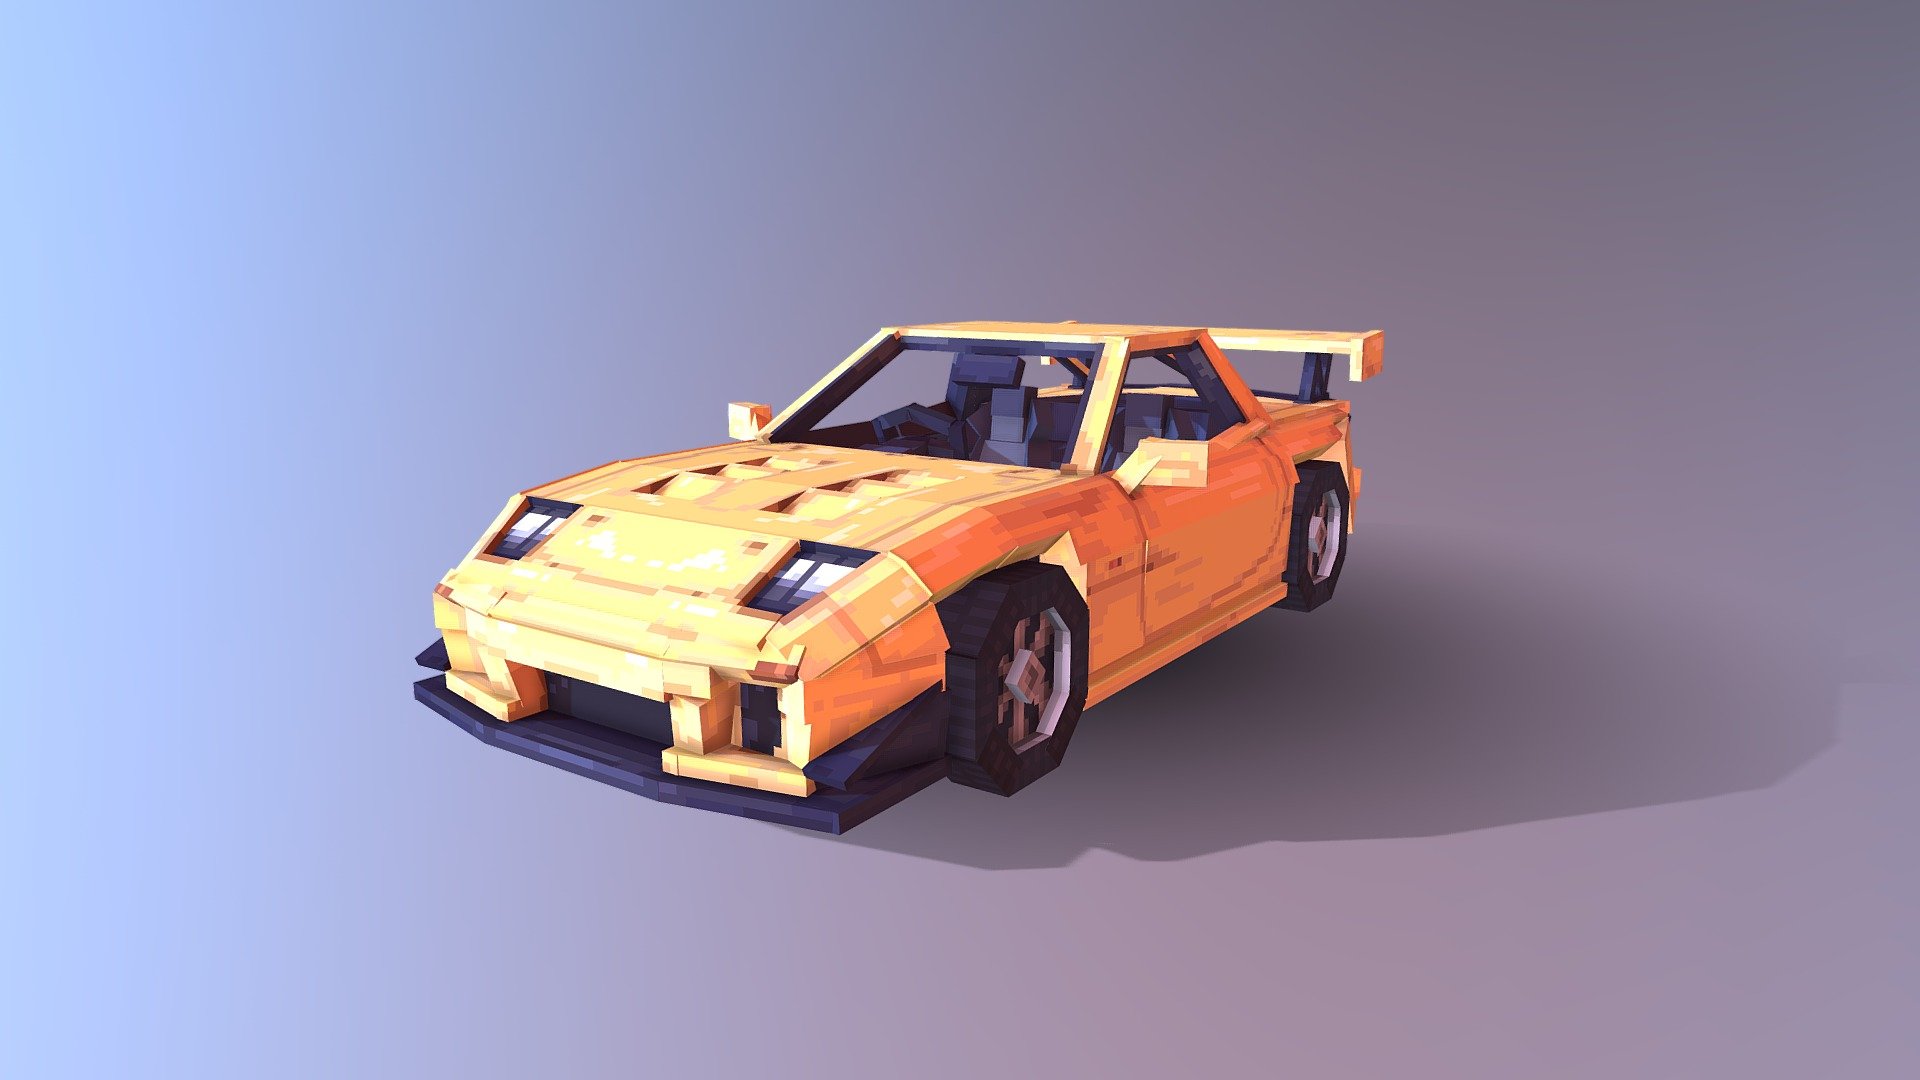 The Mazda RX-7 vehicle made in collaboration with myself doing the texture and Wave Cherry making the model. Made in Blockbench and rendered here in Sketchfab. (Interior yet to be done) - Mazda RX-7 - 3D model by SneakyDanny 3d model